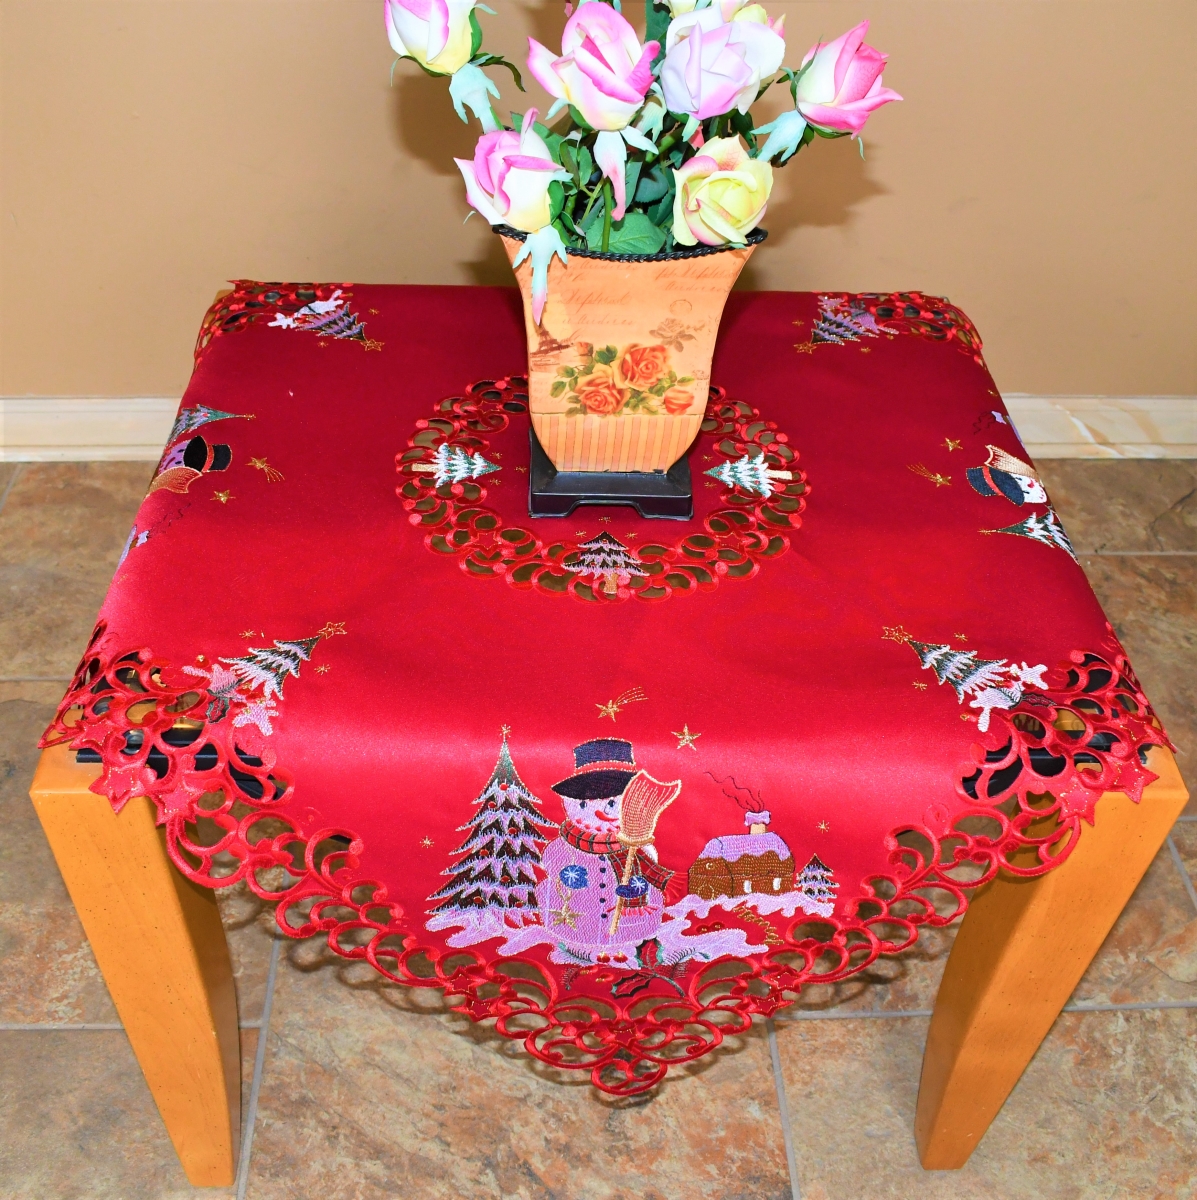 Picture of Sinobrite H8508-42x42SQ 42 x 42 in. Snowman on Red Fabric Square Table Topper